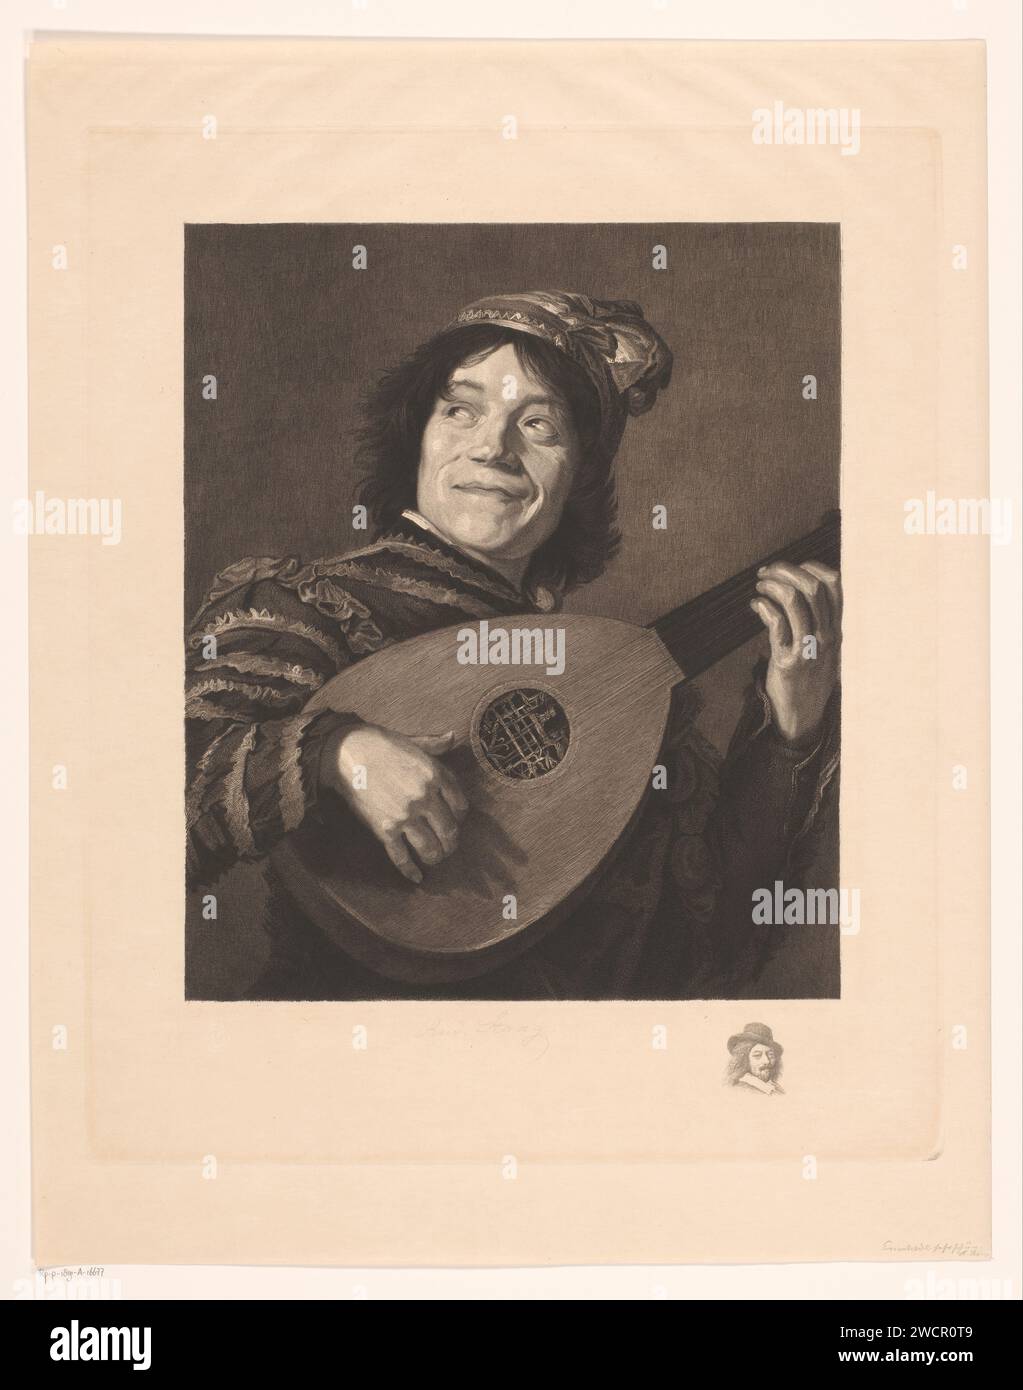 Luitspeler, Rudolf Stang, after Frans Hals, 1841 - 1891 print With a men's head on the right in the margin.  paper etching lute, and special forms of lute, e.g.: theorbo. court jester, court fool Stock Photo